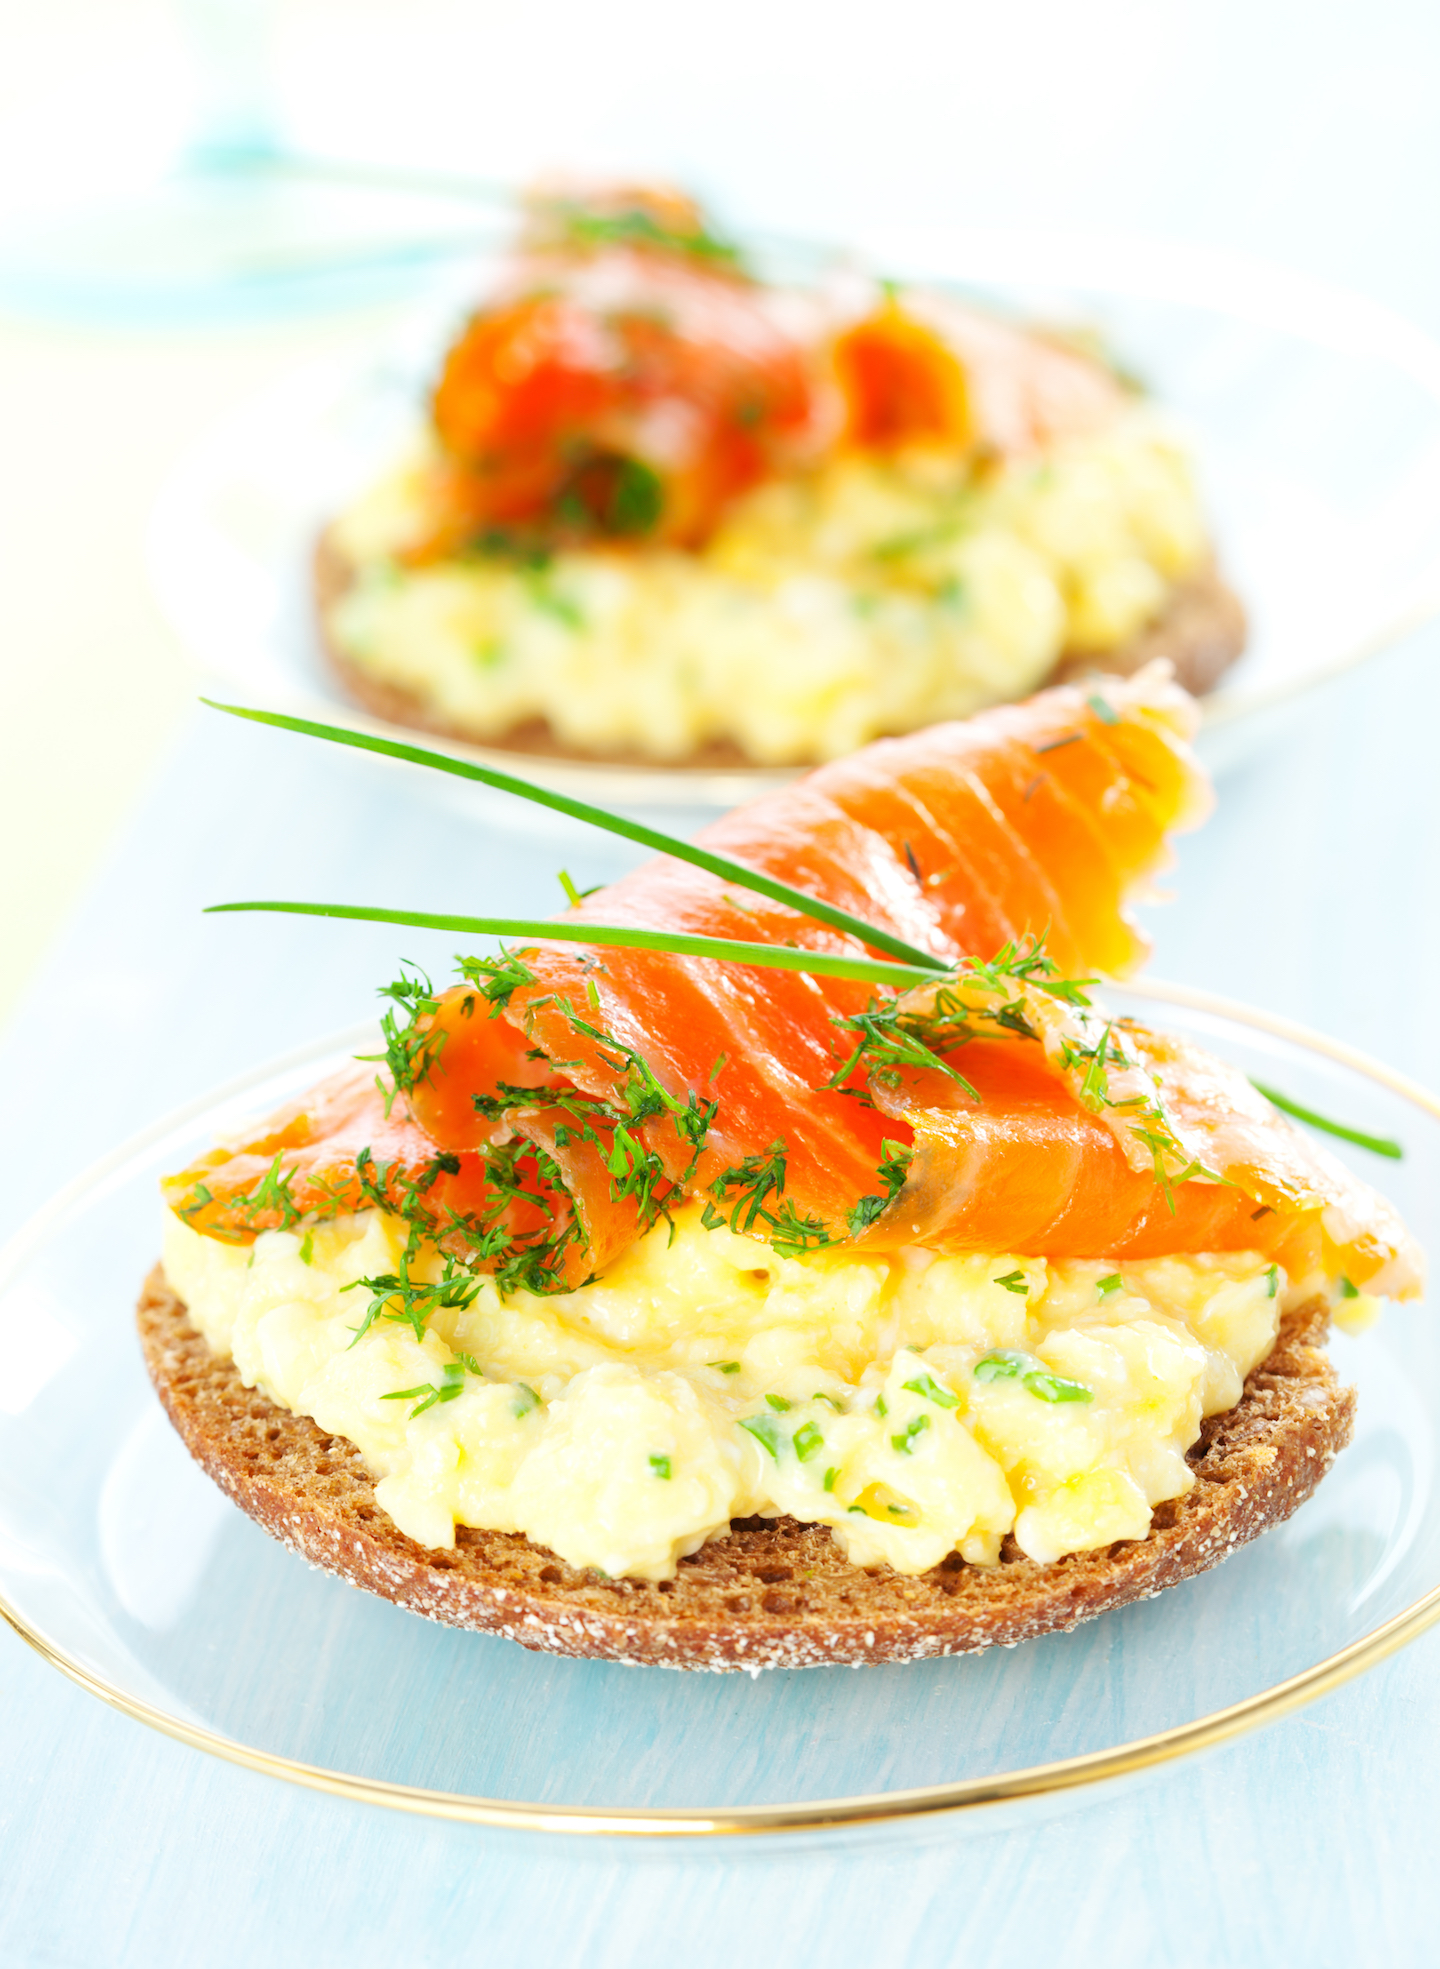 Smoked Salmon Breakfast Sandwich with chives and scrambled eggs